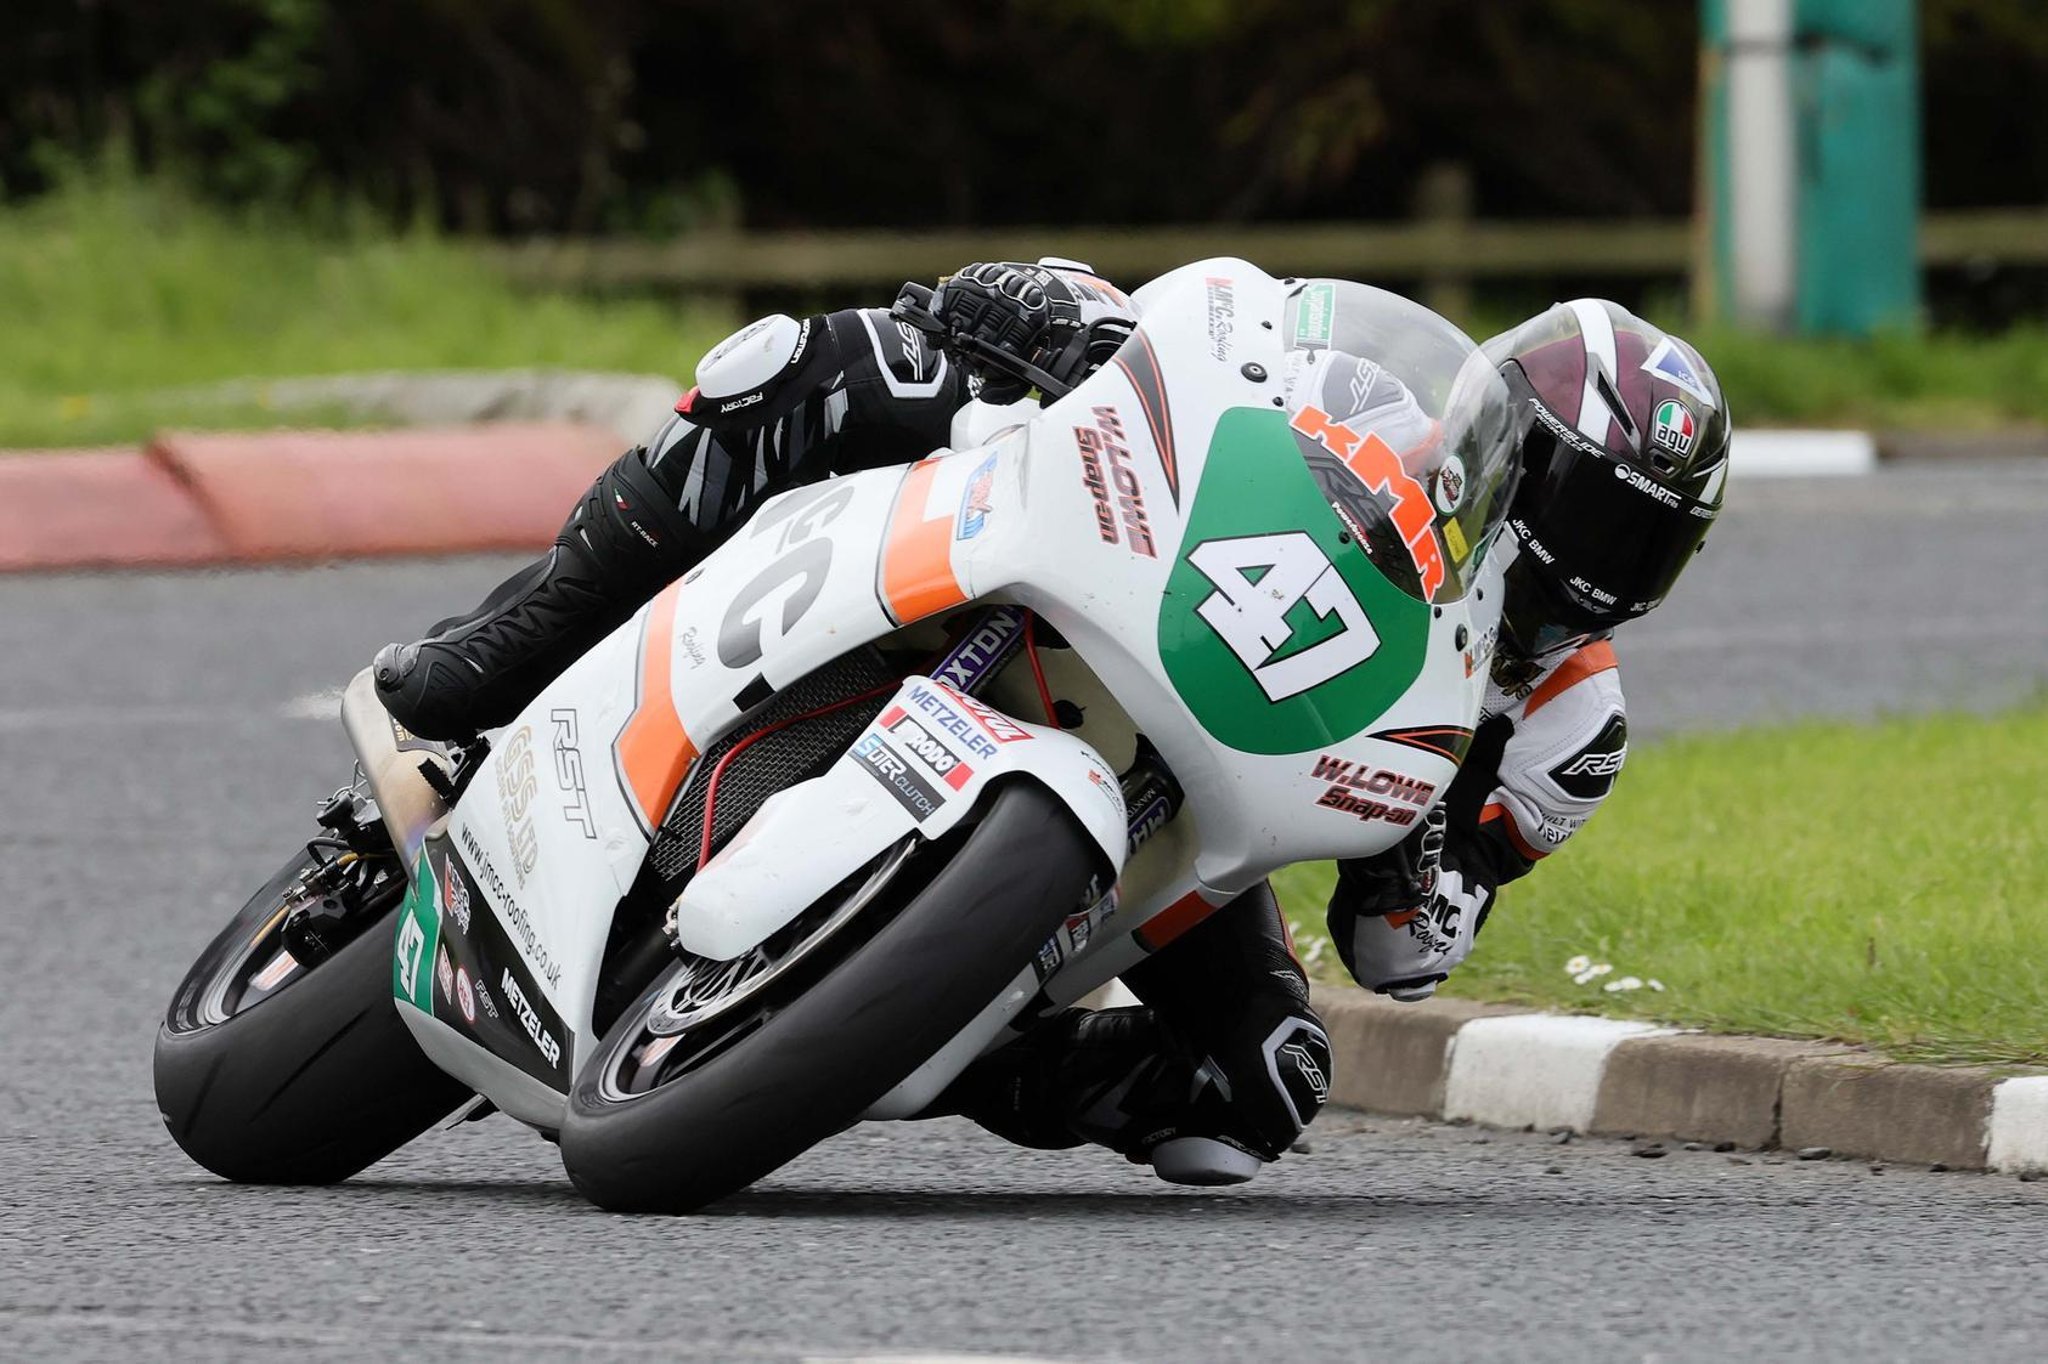 NW200: Richard Cooper powers to maiden victory in opening Supertwin race on Ryan Farquhar-built Kawasaki